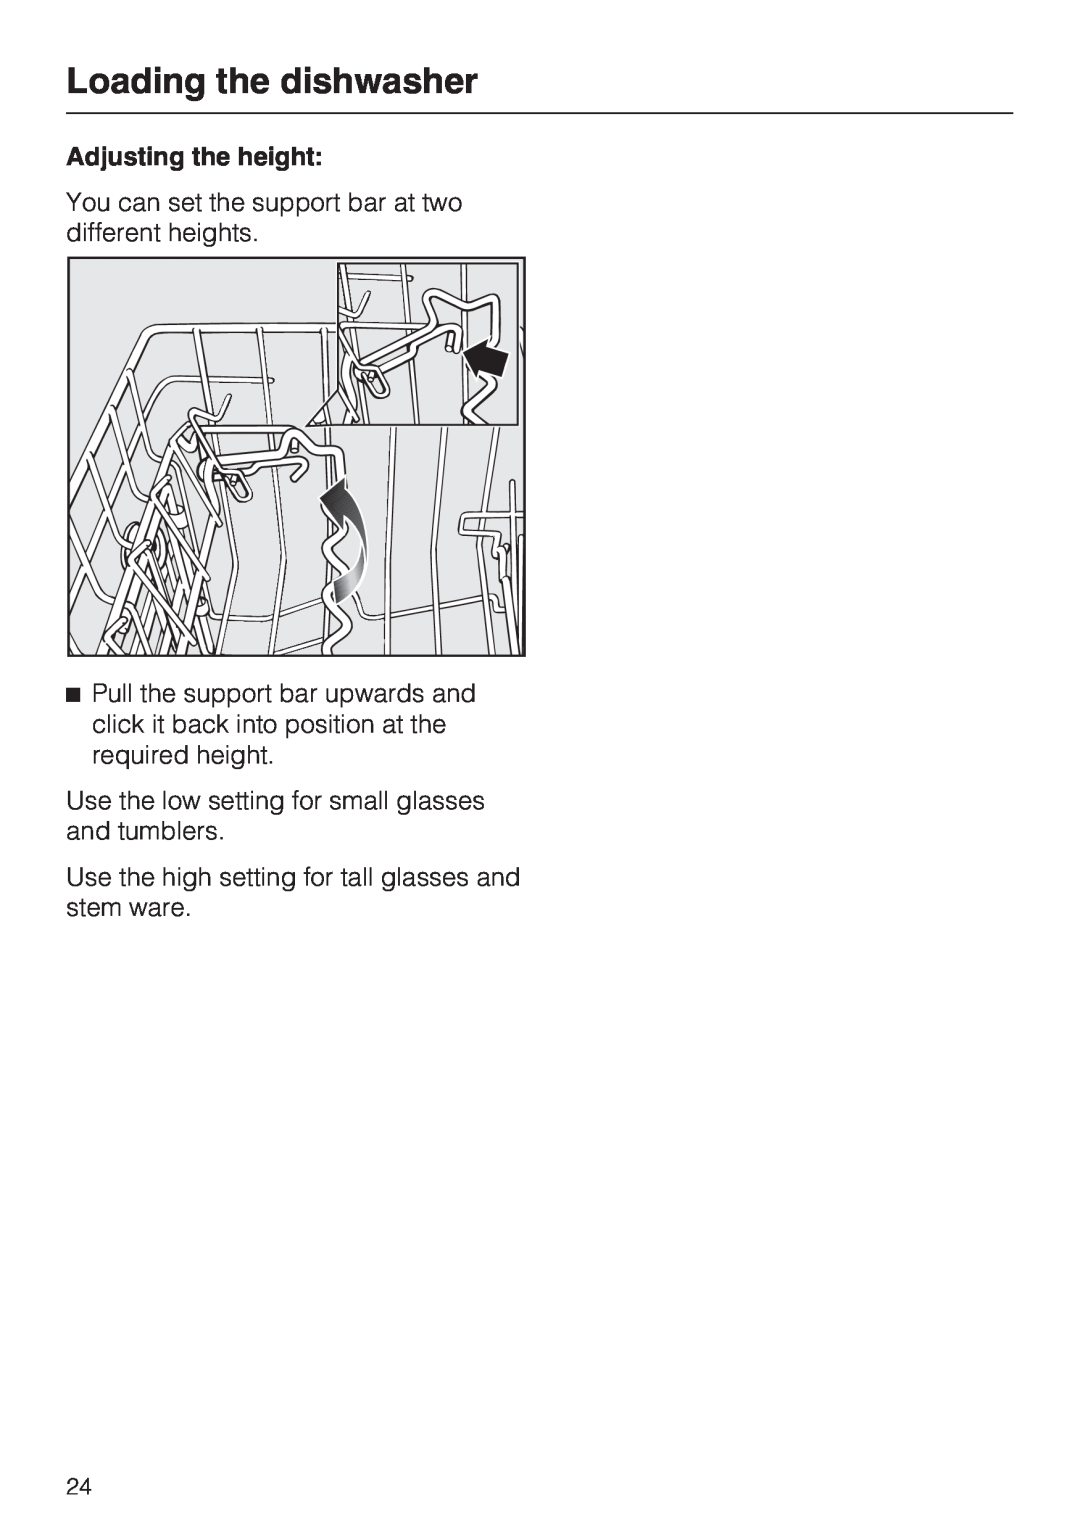 Miele G 5705, G 5700 operating instructions Loading the dishwasher, Adjusting the height 